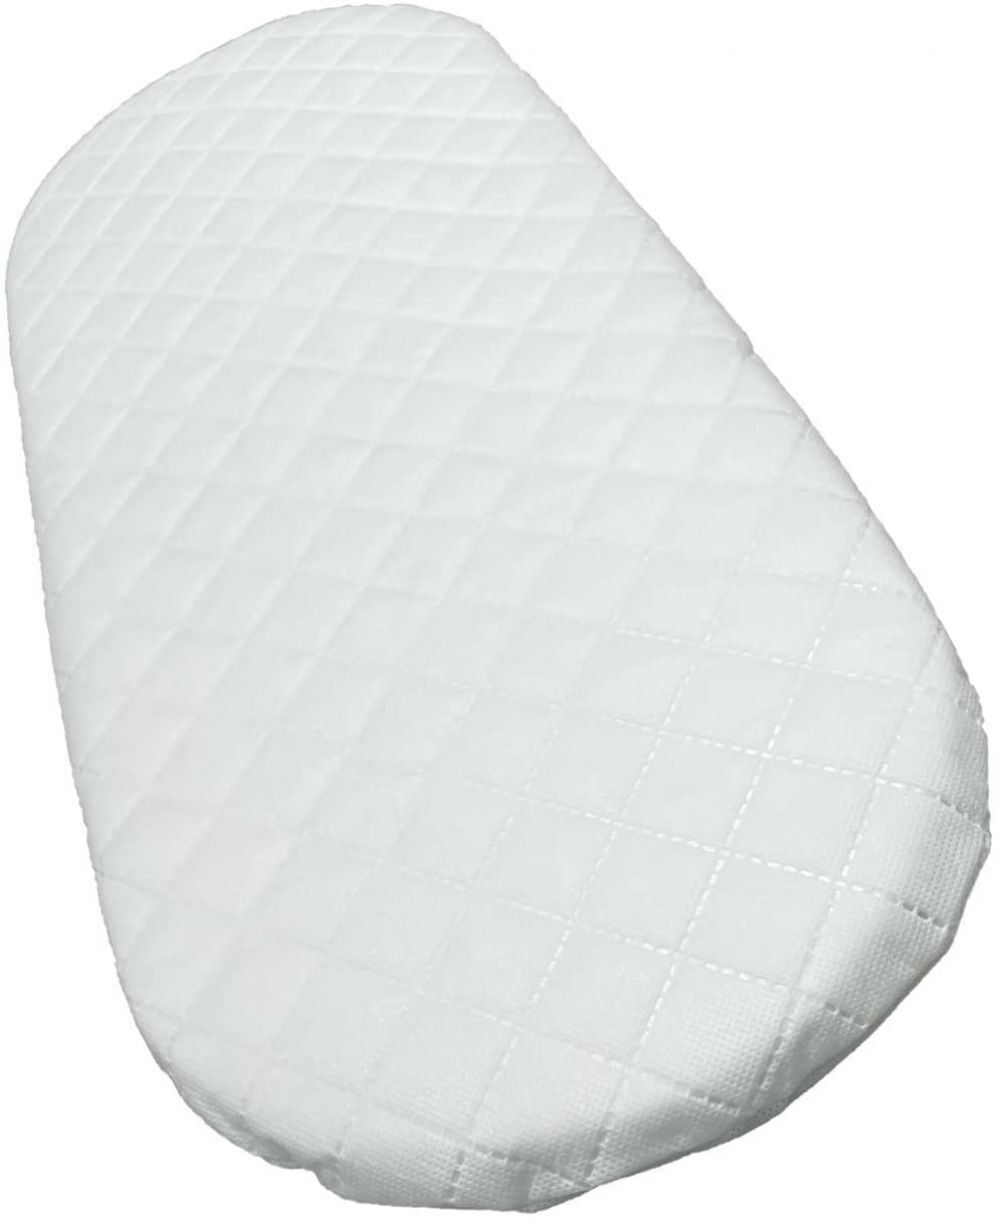 iCandy Peach Carrycot Luxury Replacement Mattress